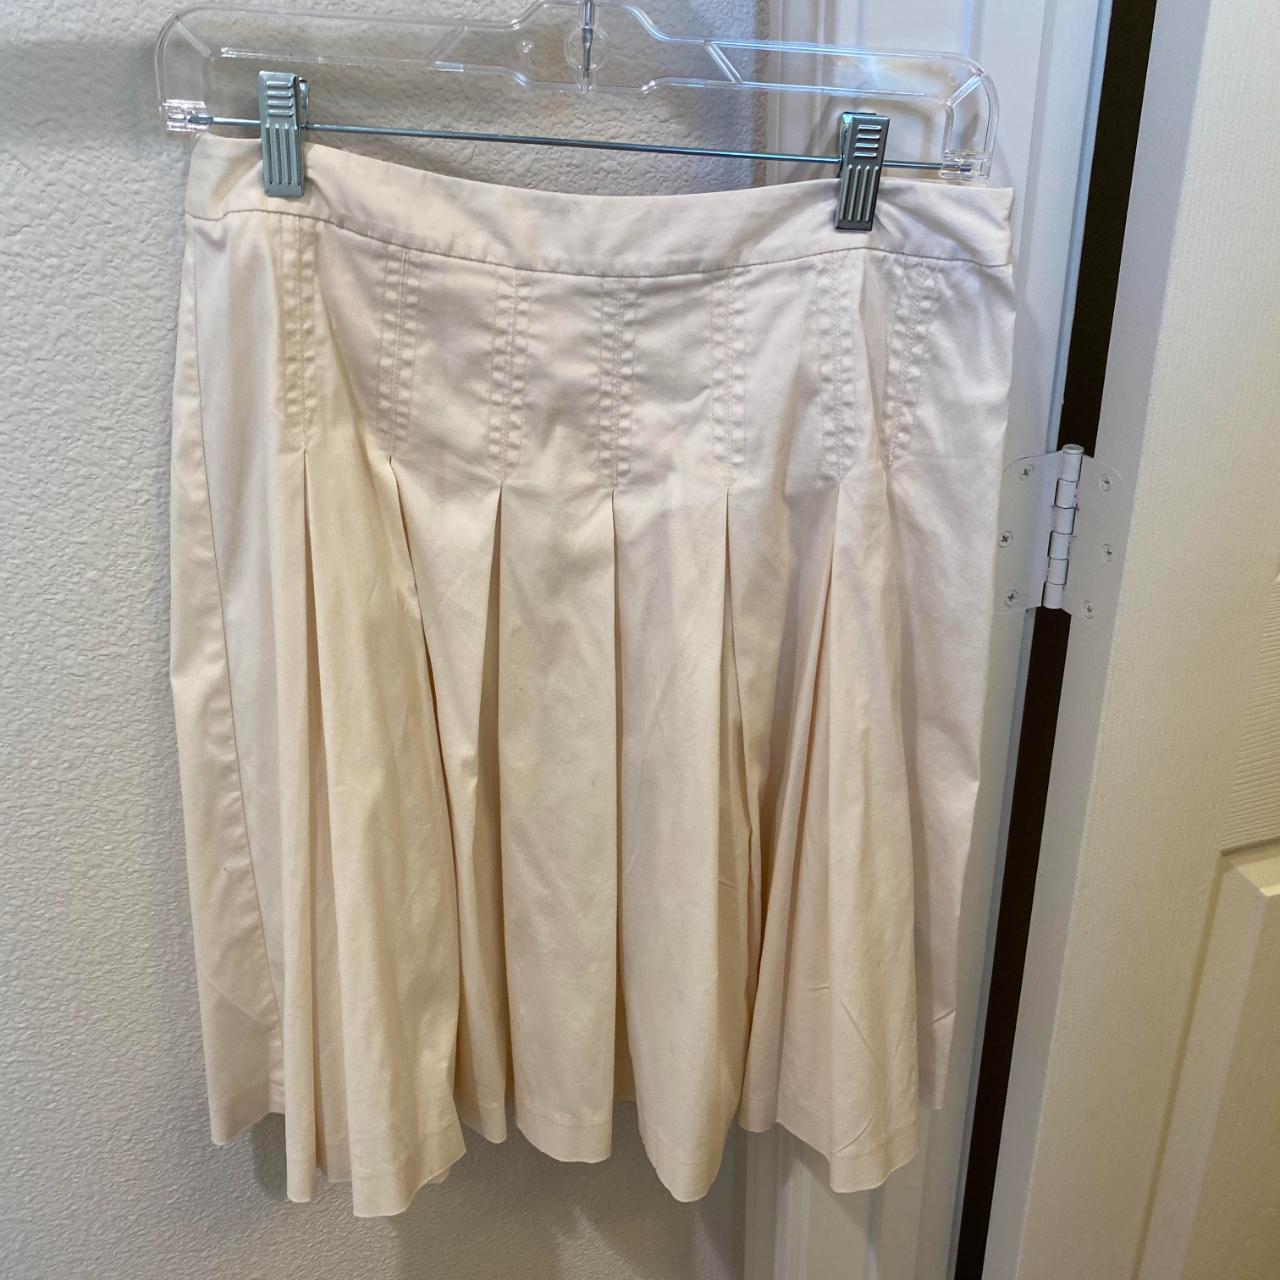 Vintage White Pleated Skirt Size US6 Made in South... - Depop